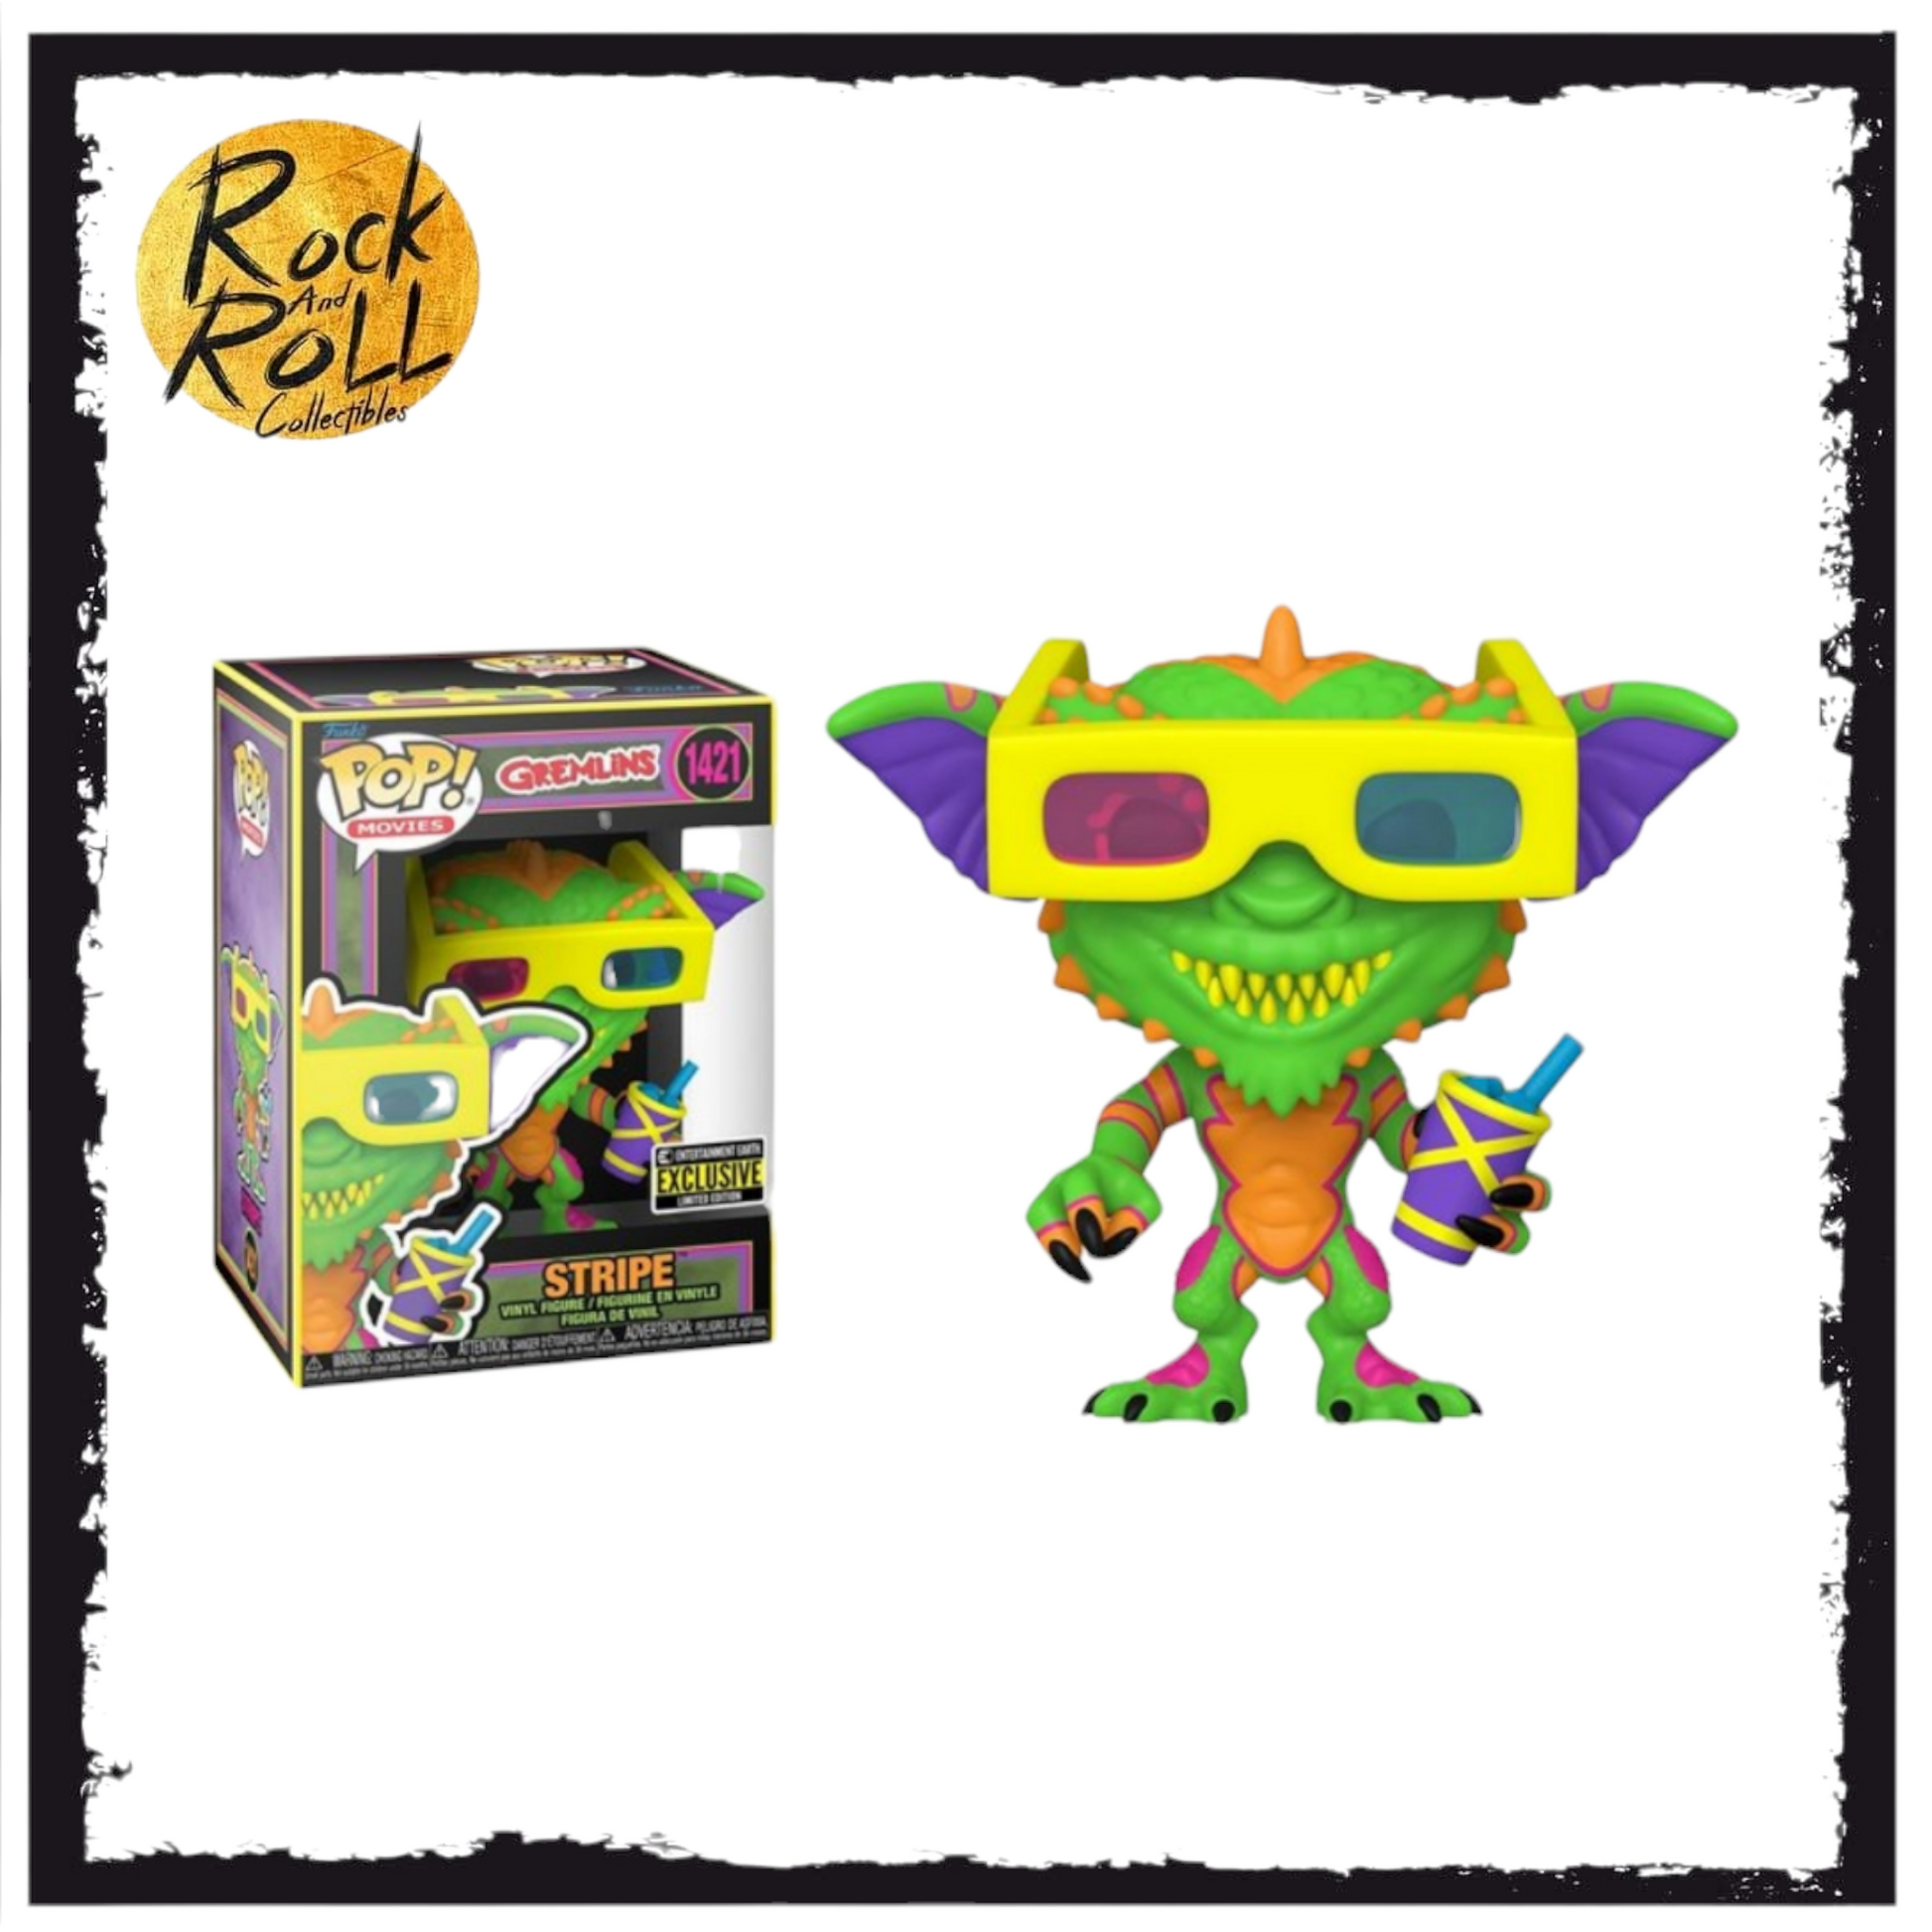 Gremlins - Gizmo Blacklight Funko Pop! #1420 Entertainment Earth Exclu –  rock and roll collectibles